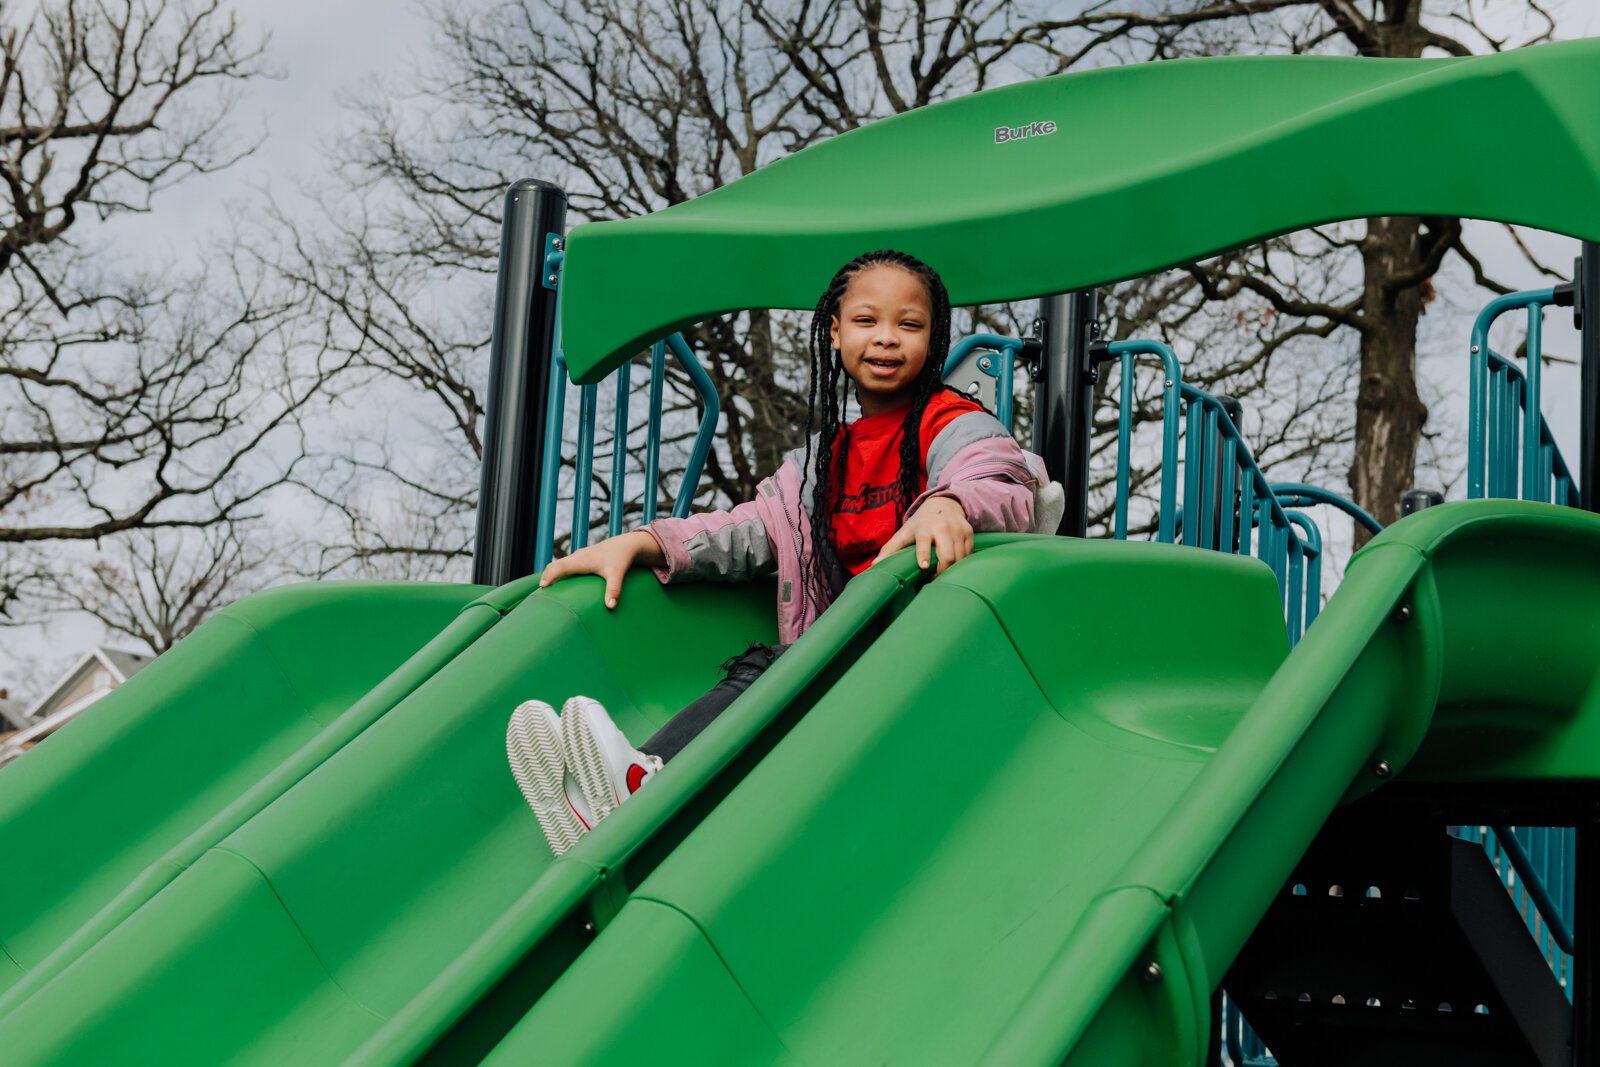 Kamyra Smith slides on the playground during the fourth grade recess at Forest Park Elementary School.